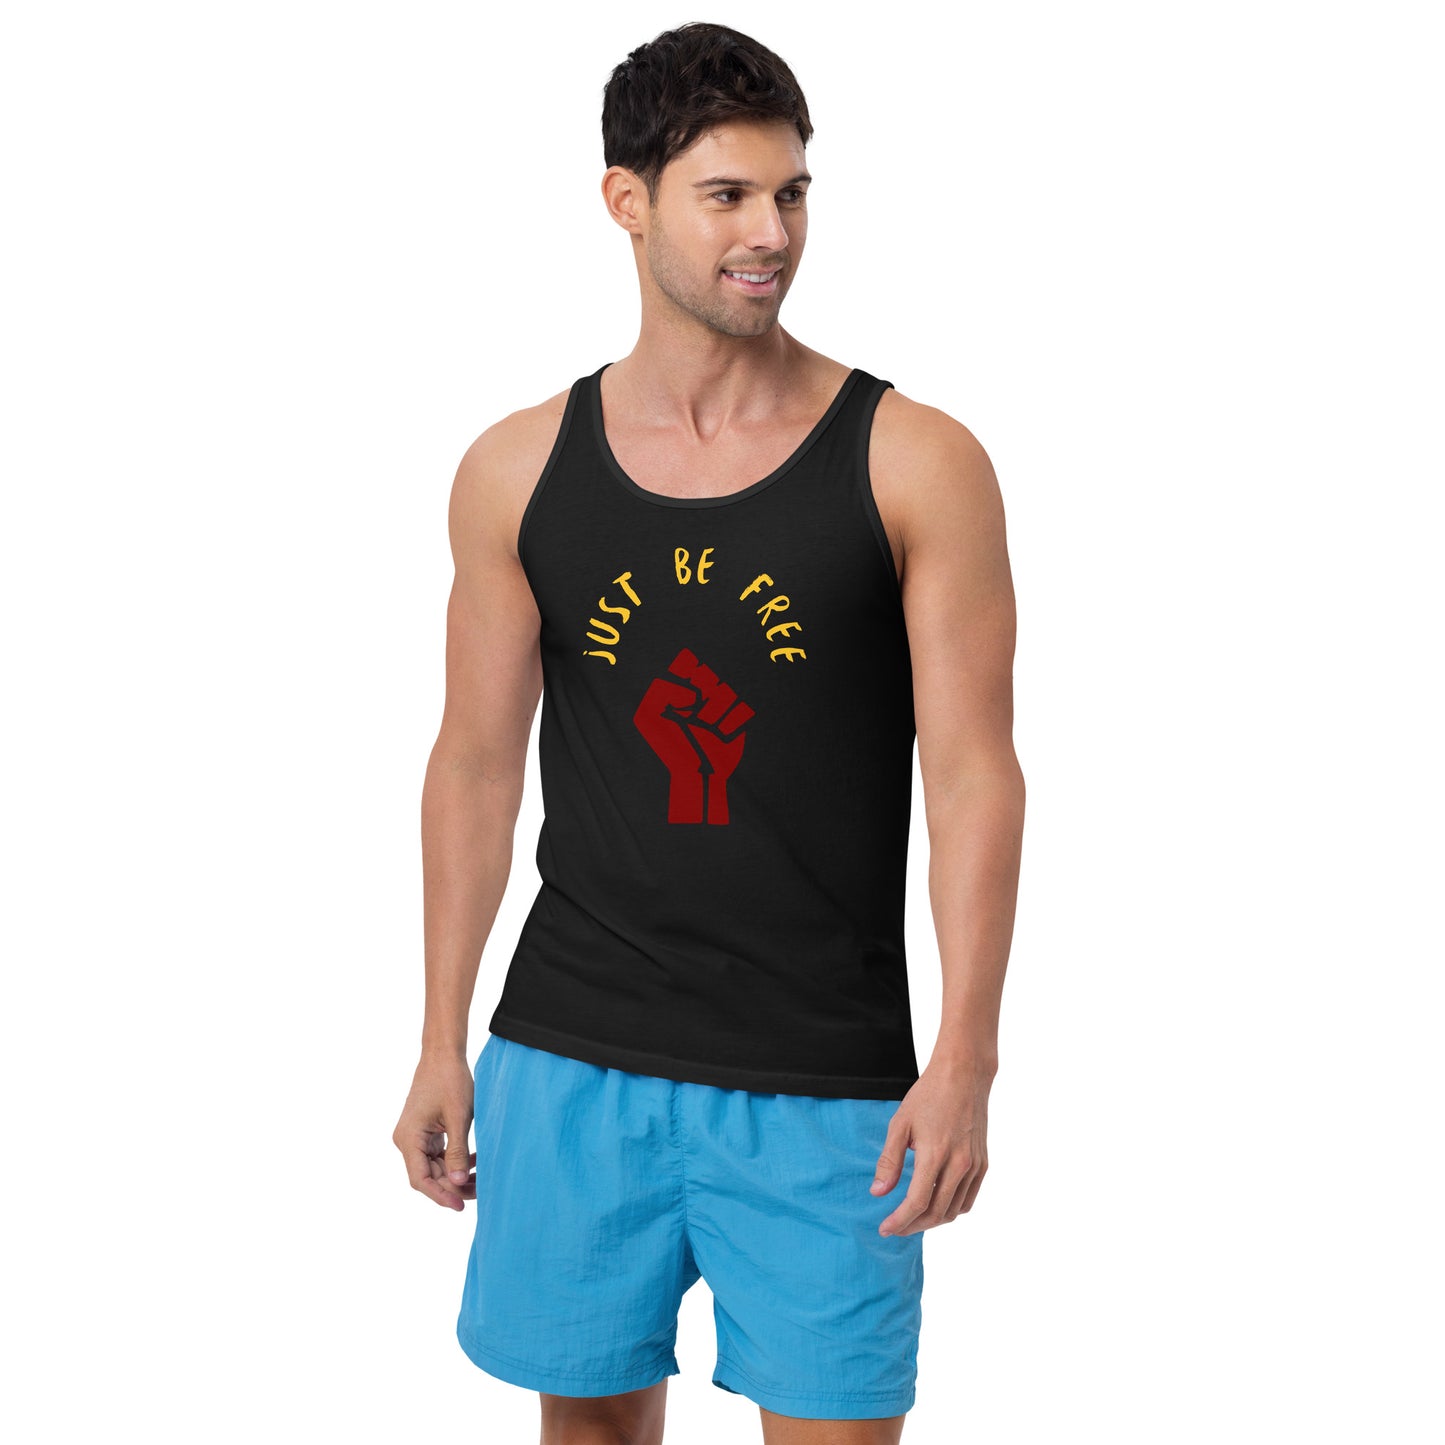 Anarchy Wear "Just Be Free" Unity Unisex Tank Top